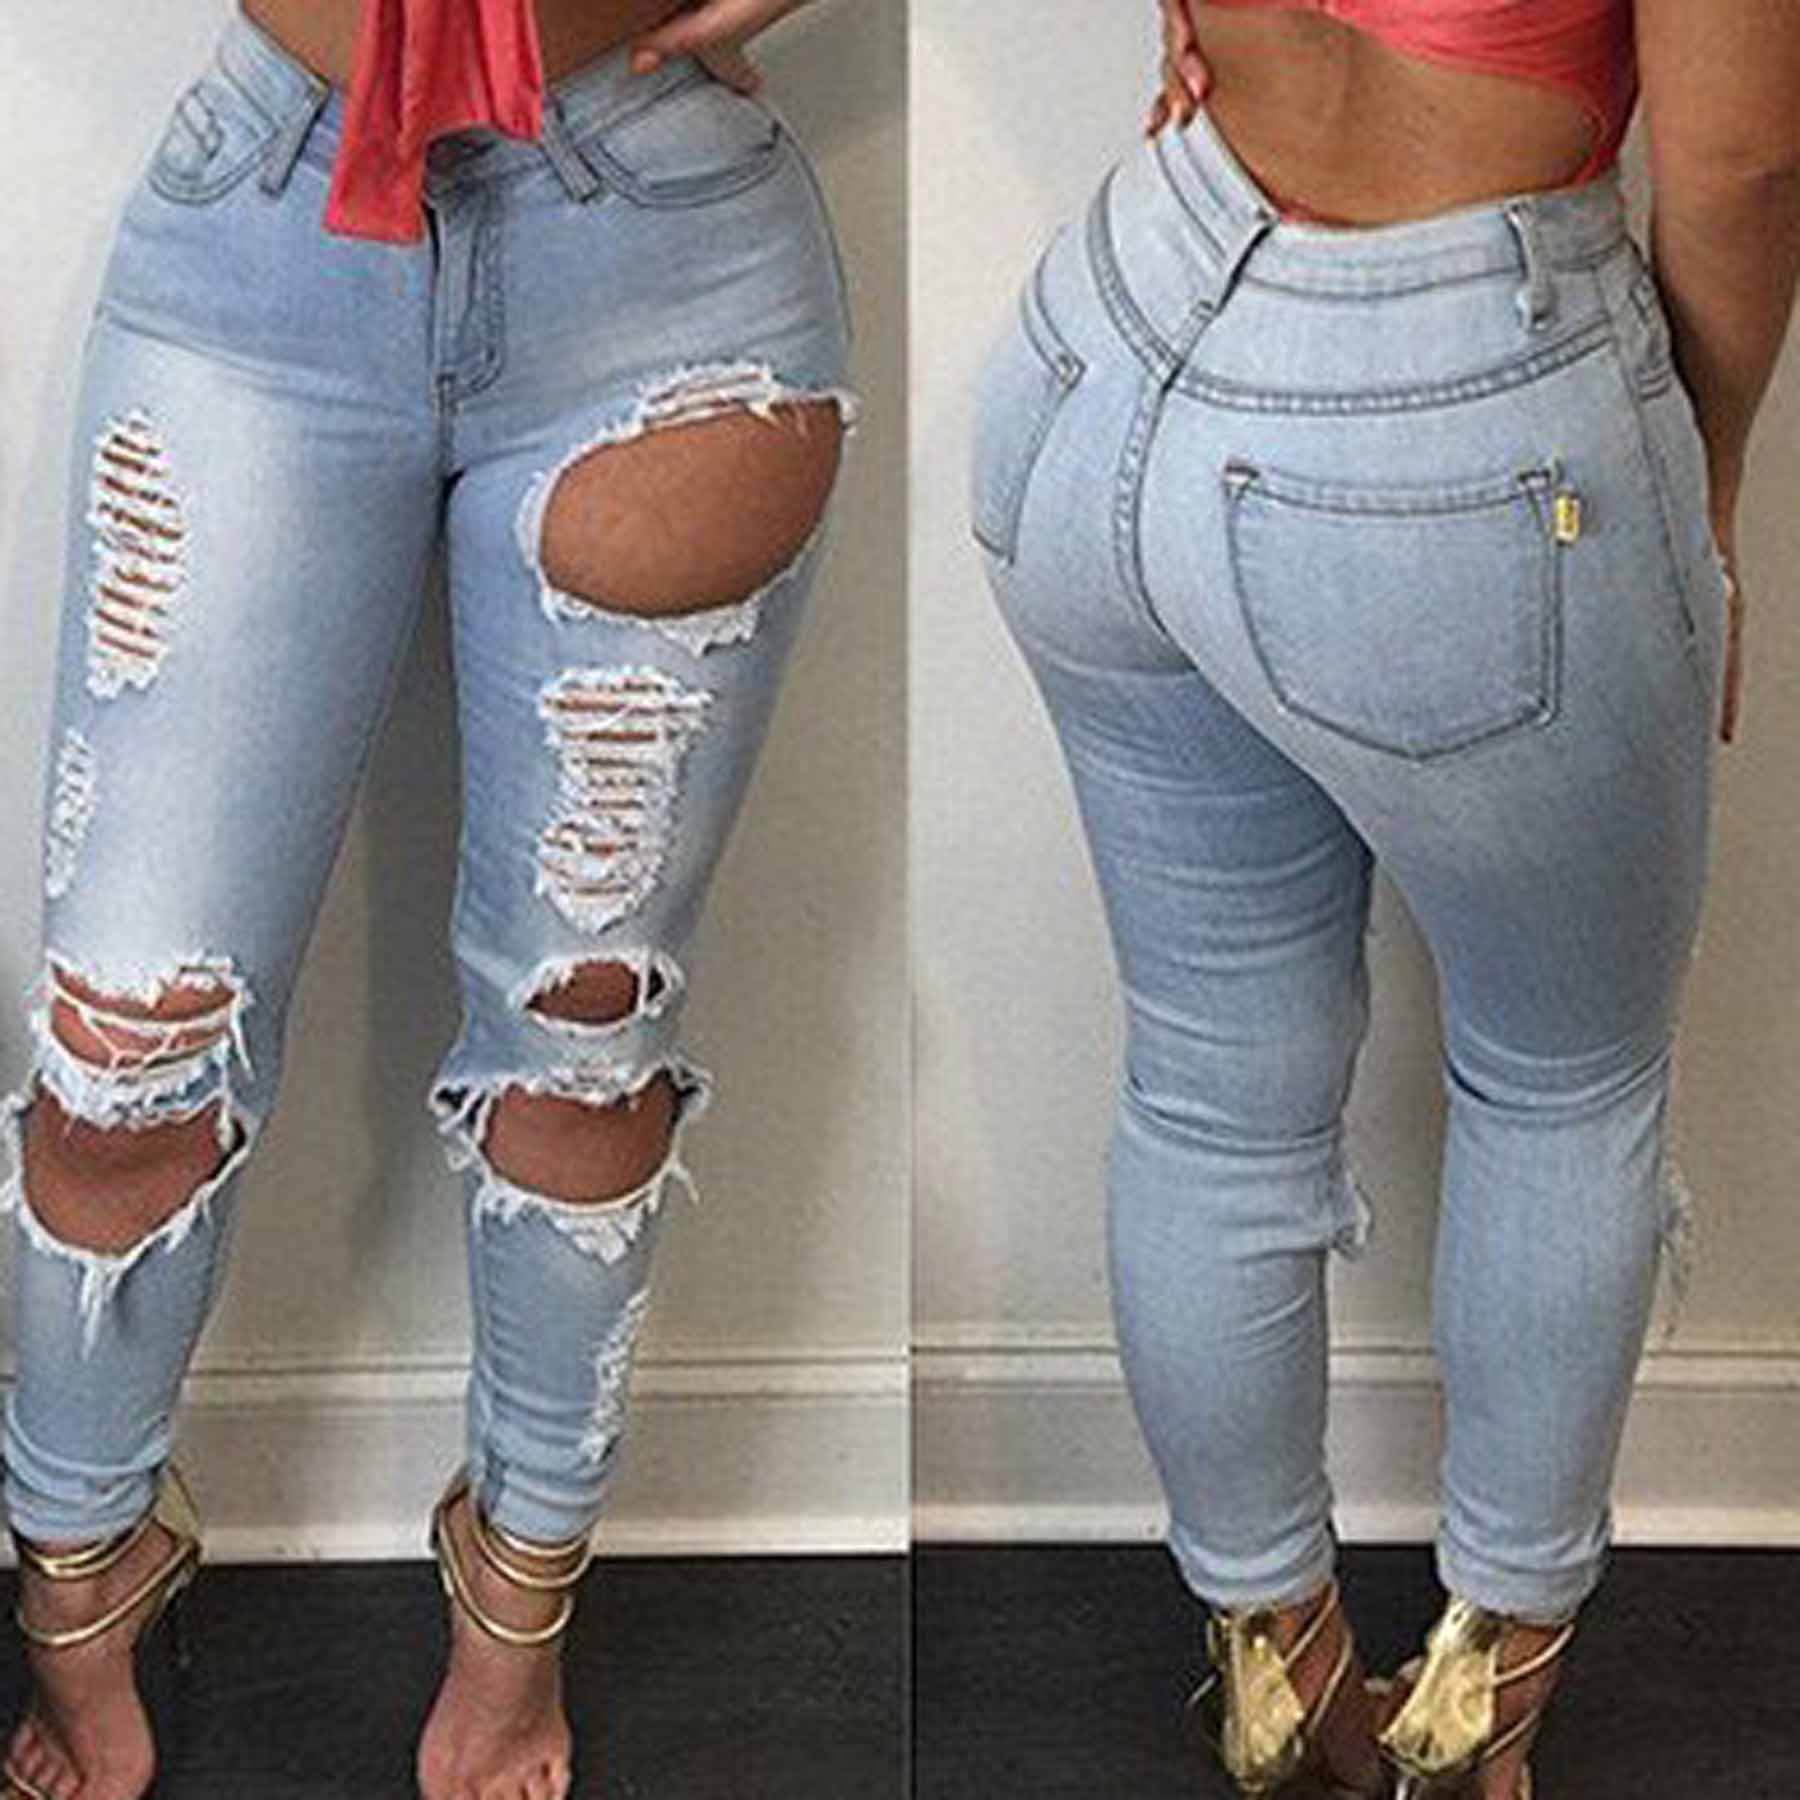 High Waist Cut Out Rough Holes Pocket Long Skinny Jeans